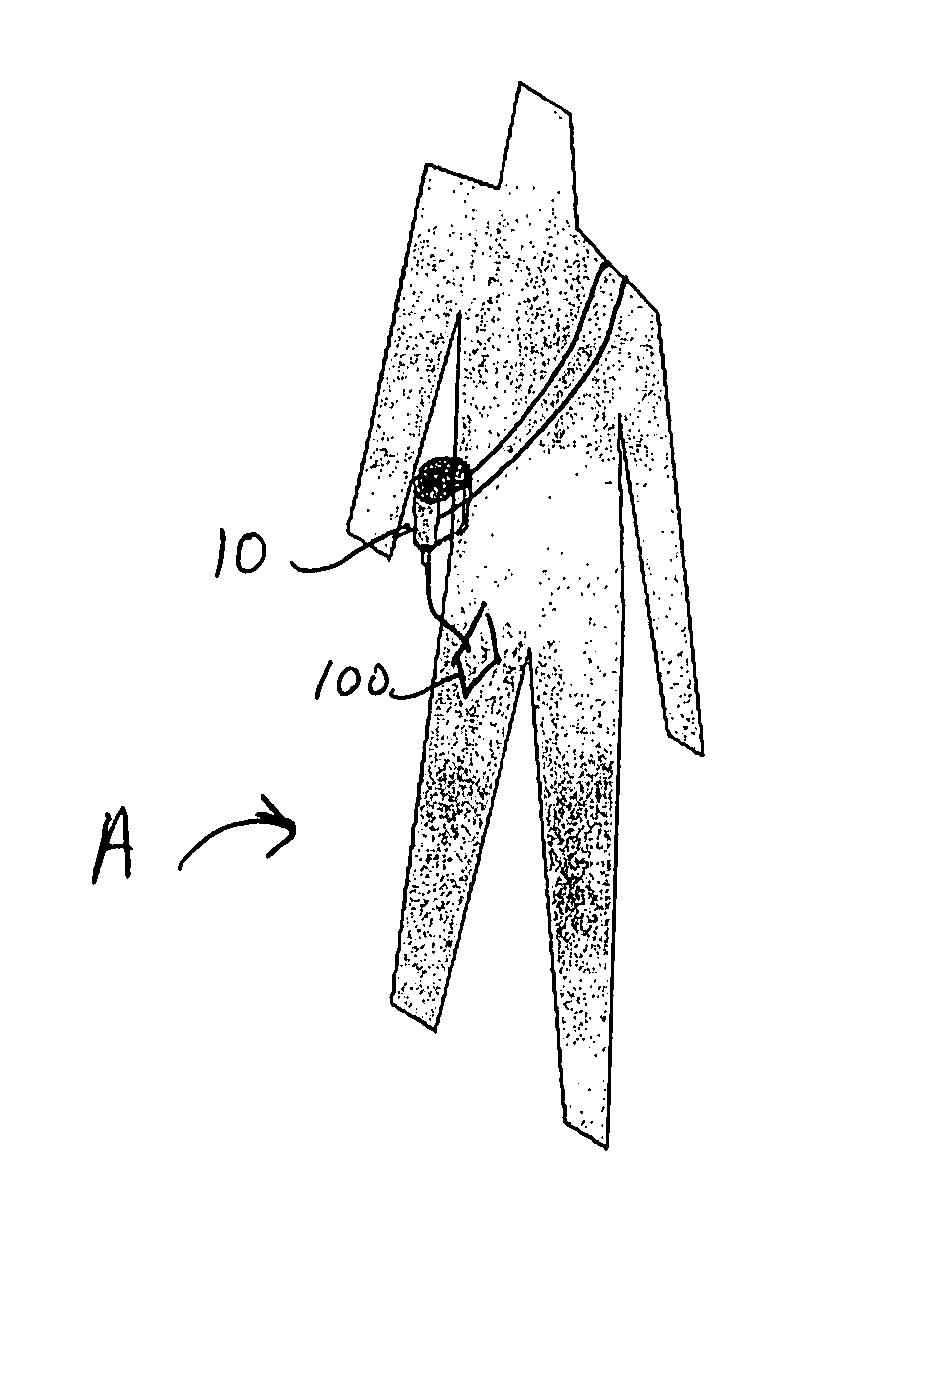 Negative pressure wound treatment device, and methods